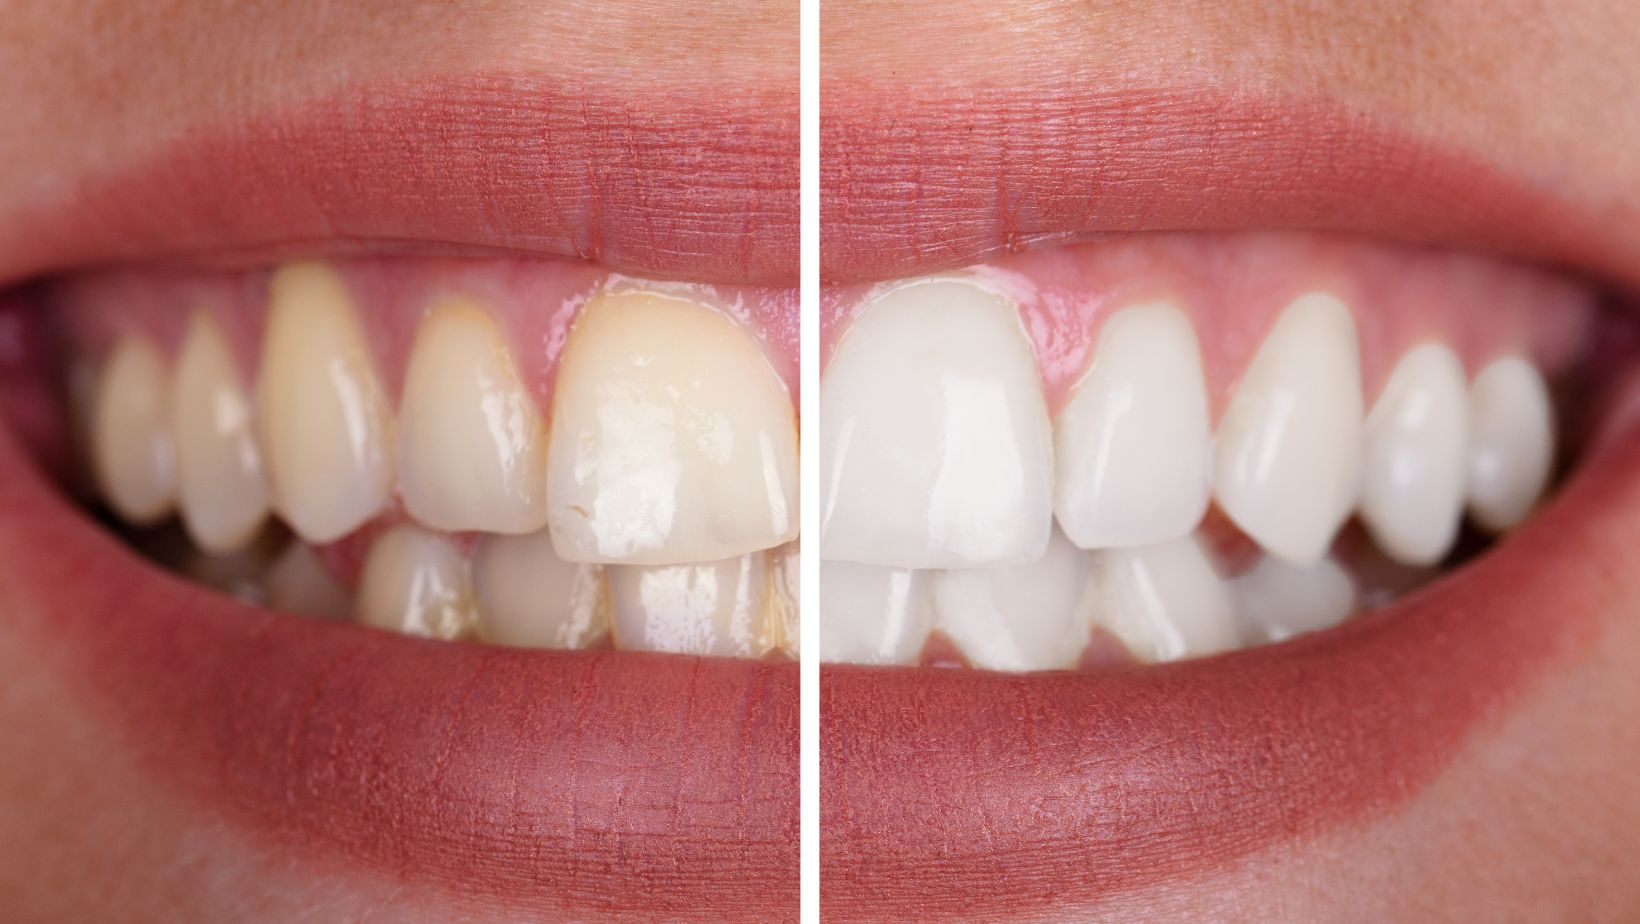 Before and after images of teeth cleaned by a dentist